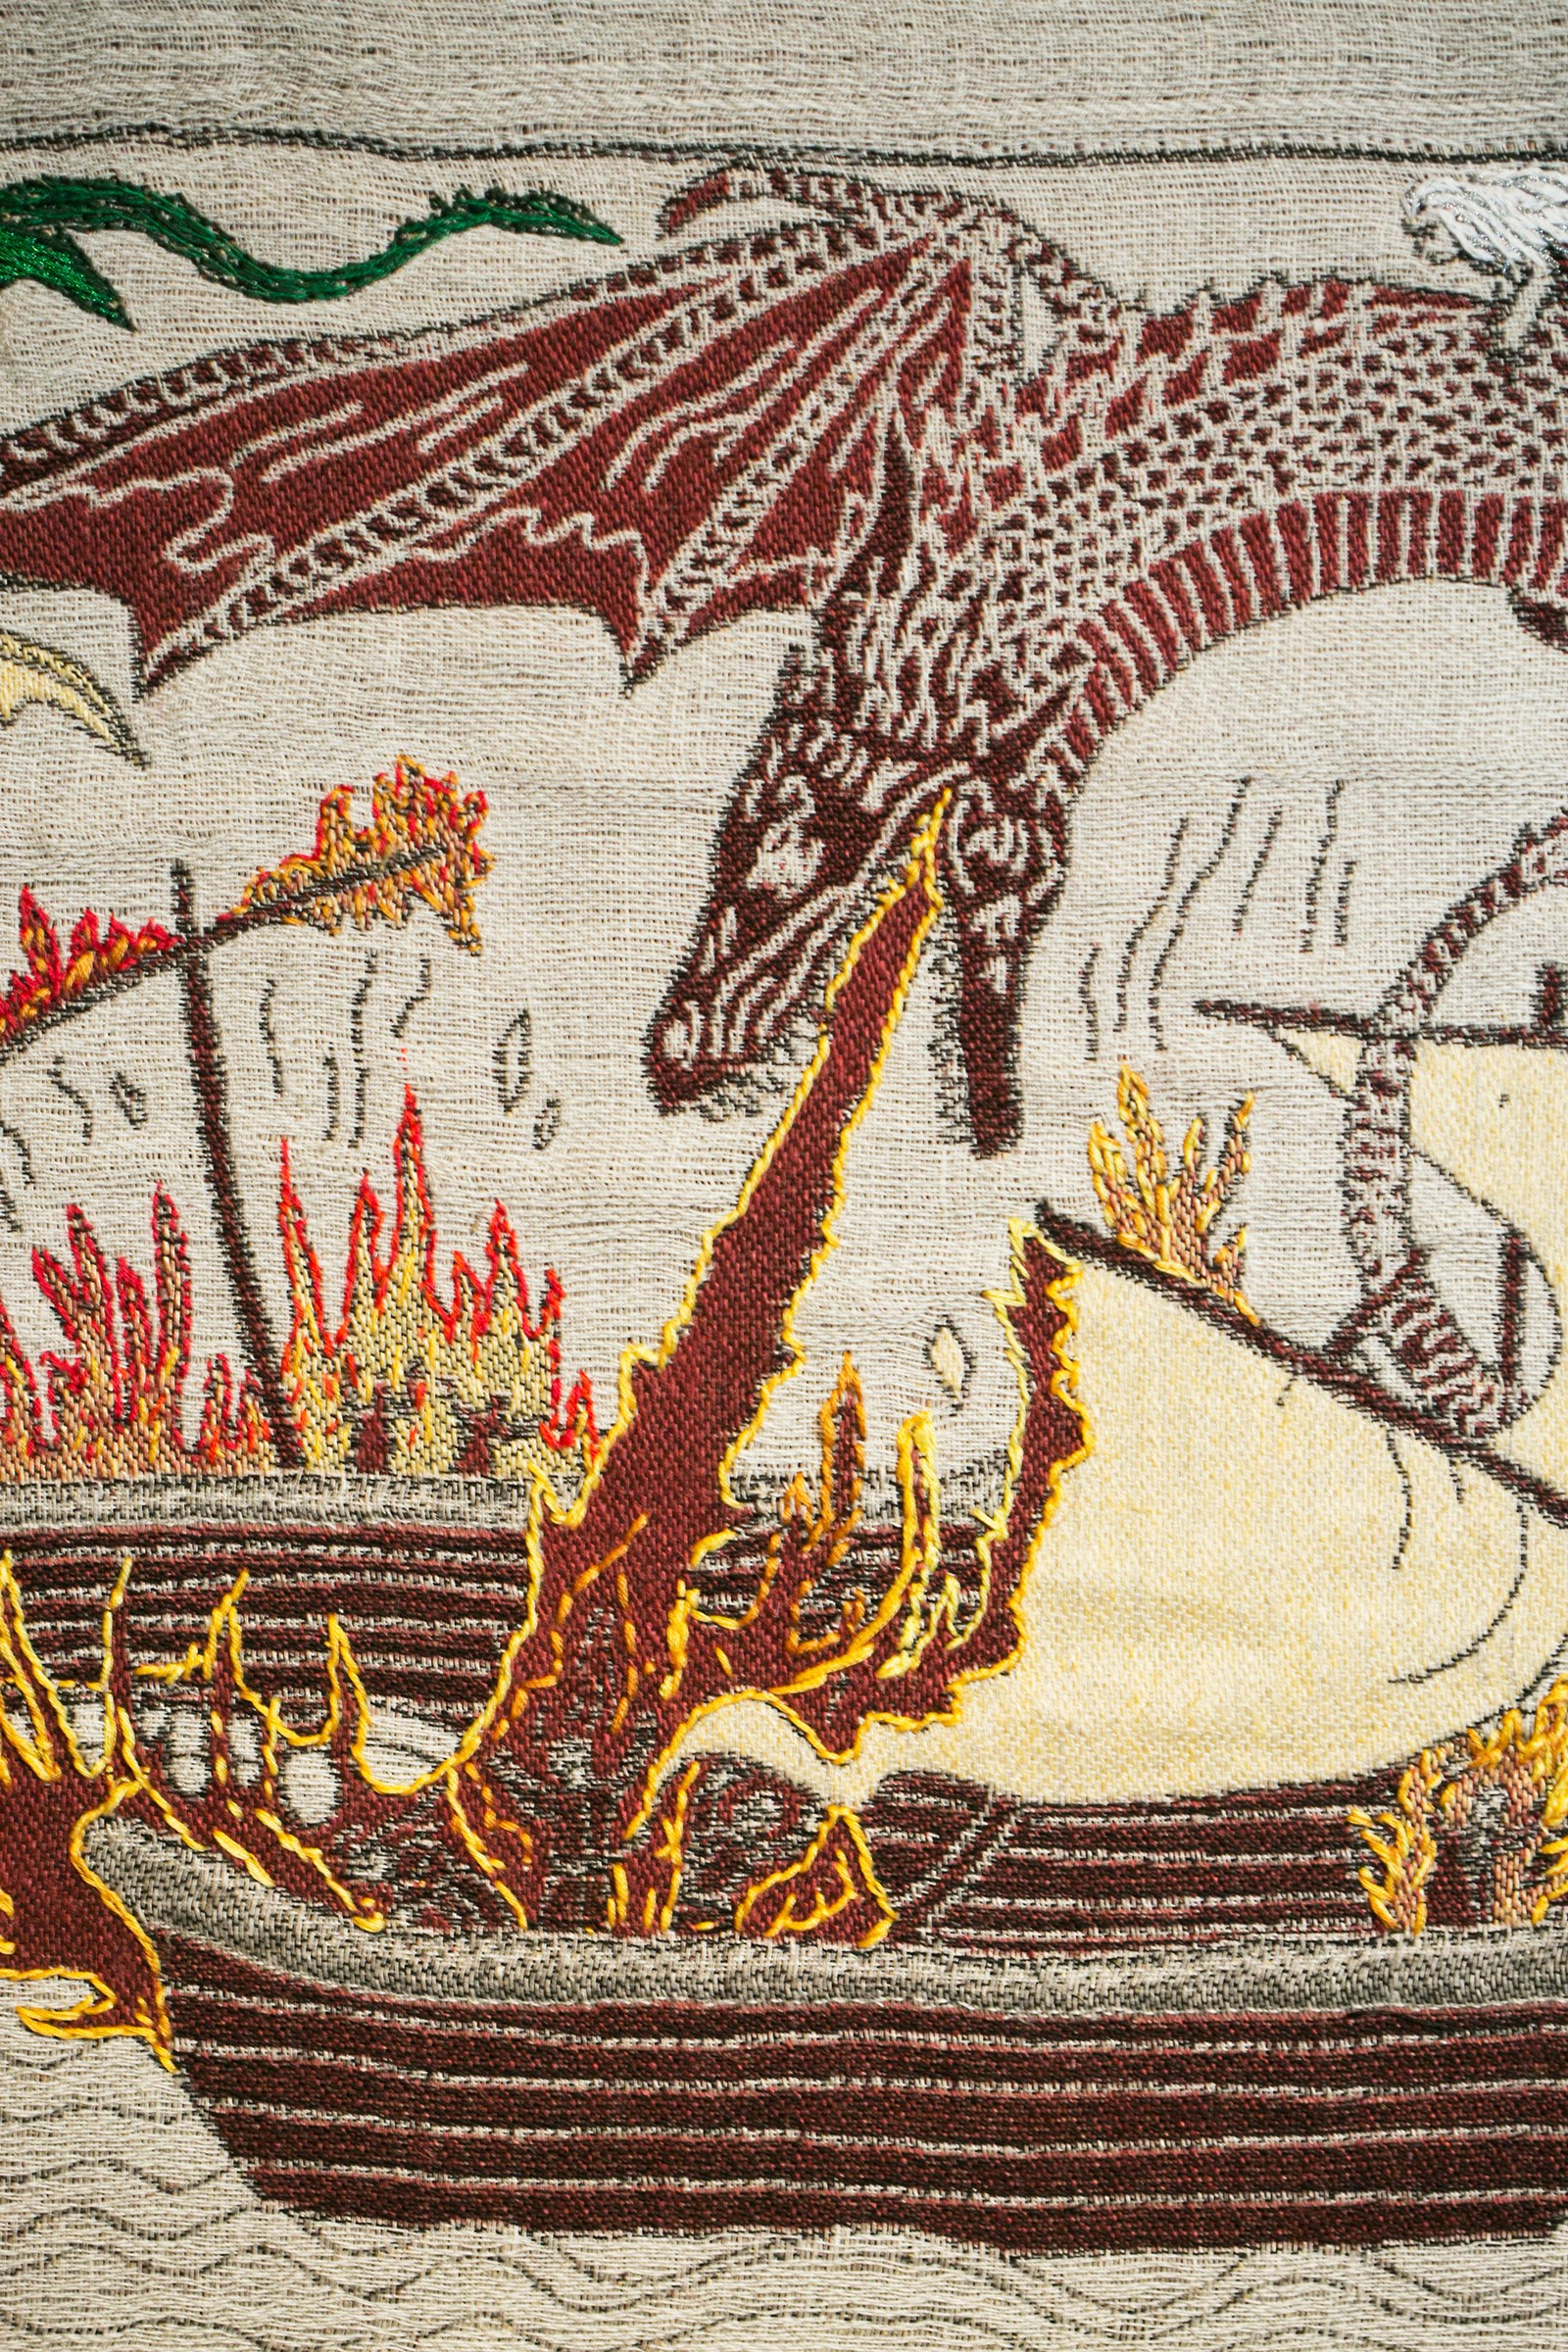 Game Of Thrones Embroidery Patterns So You Want To Build A 253 Foot Game Of Thrones Tapestry Vogue